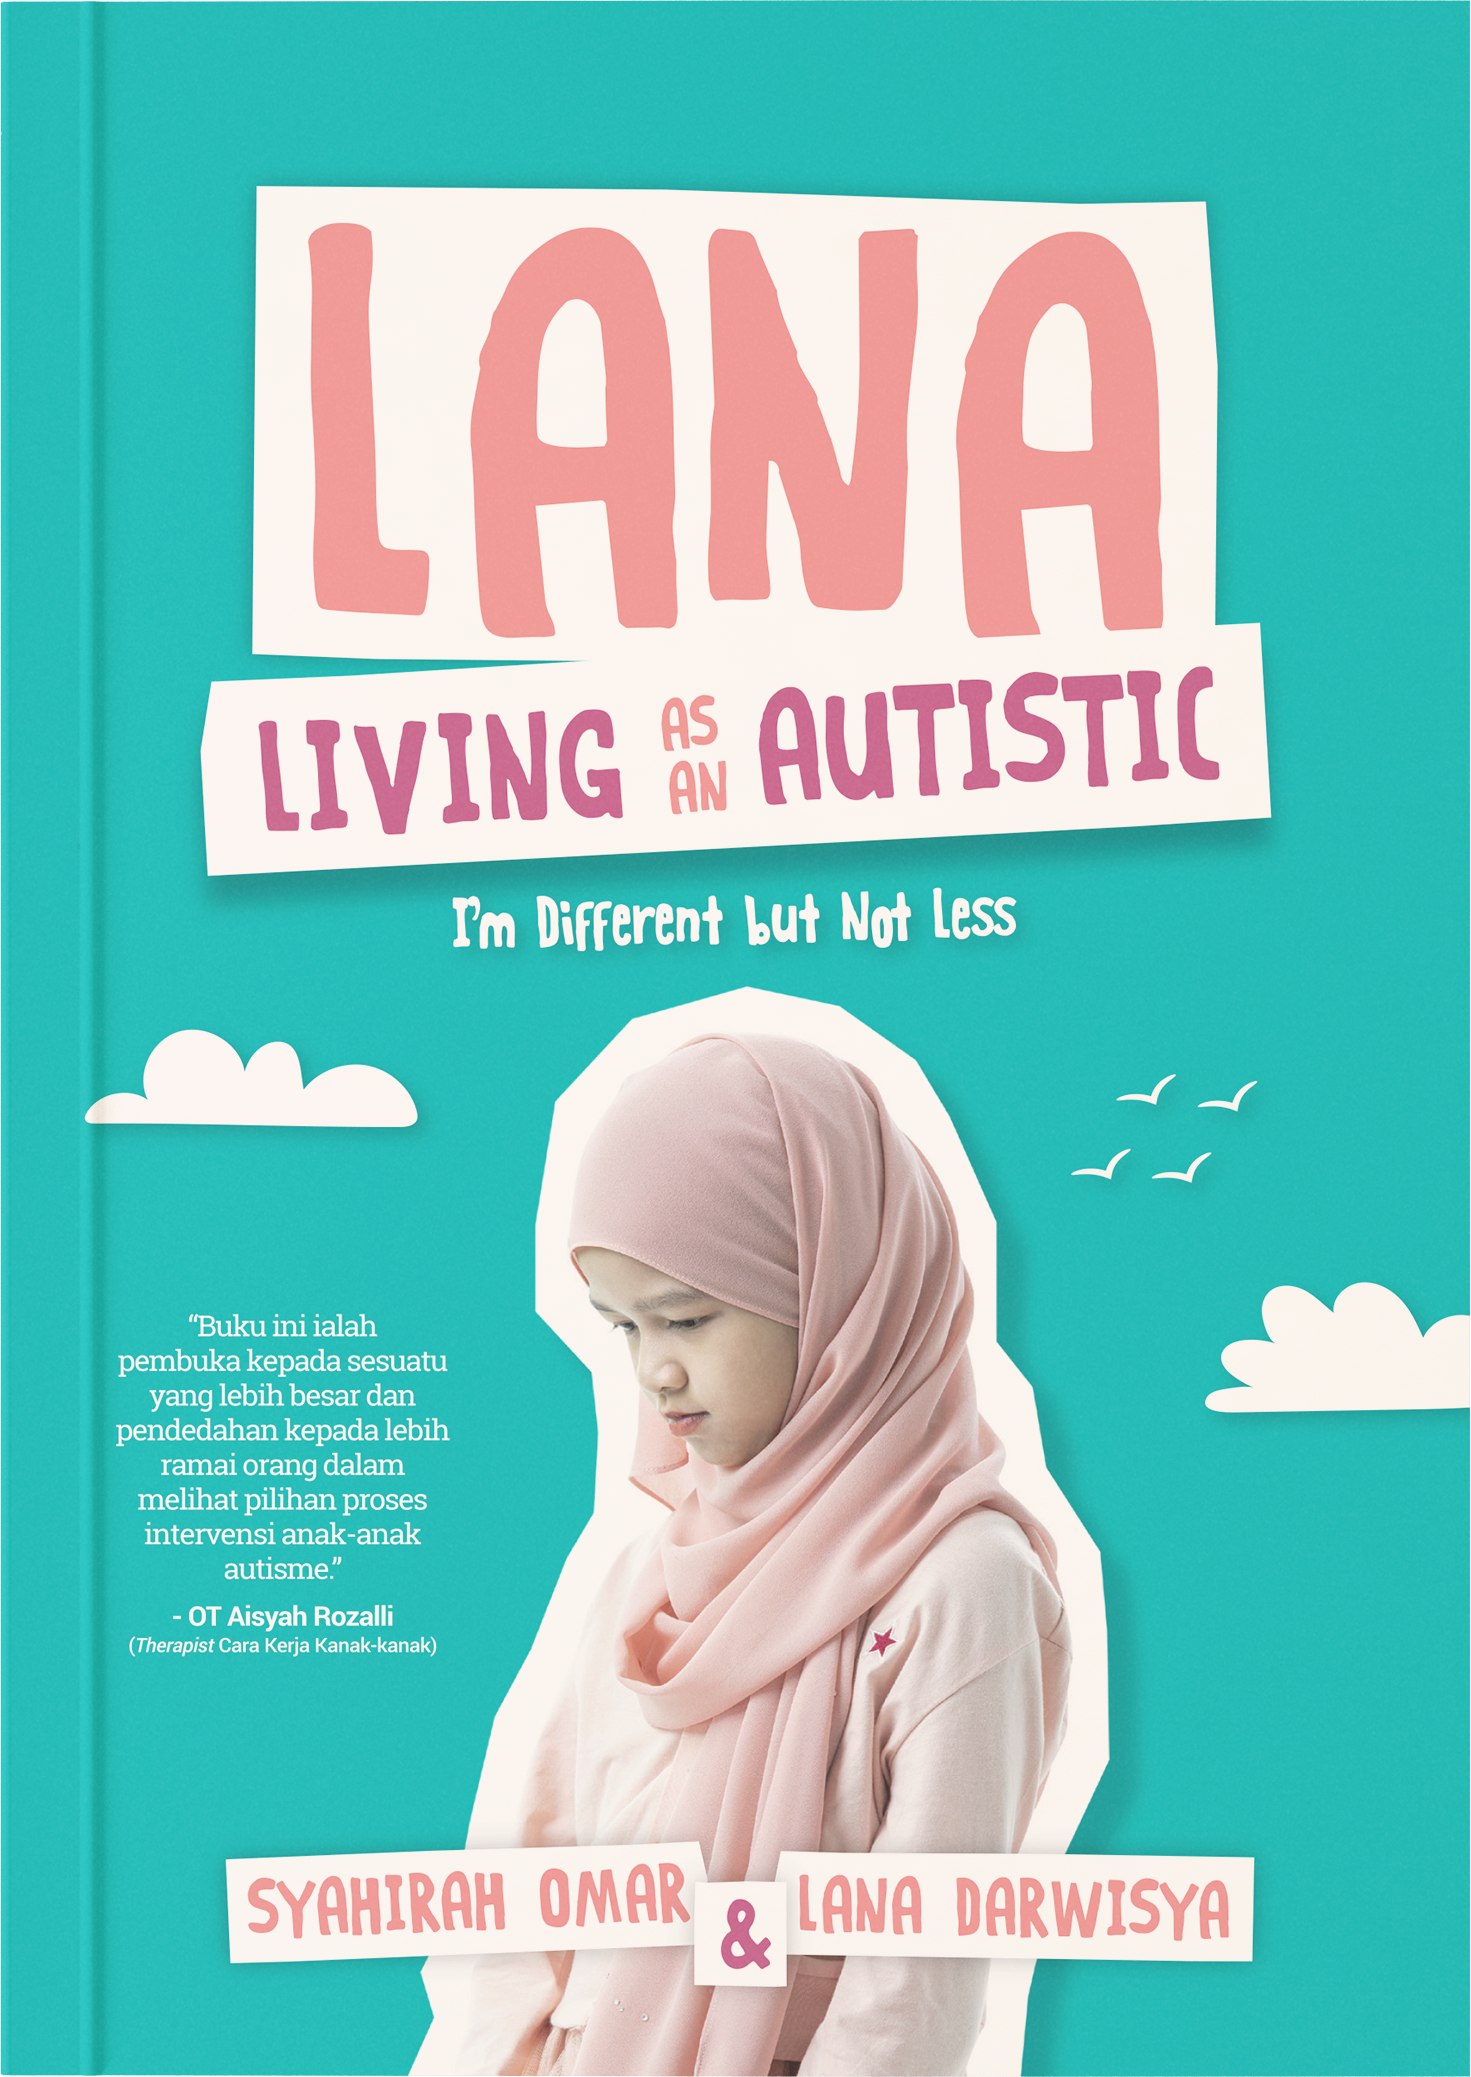 LANA LIVING AS AN AUTISTIC